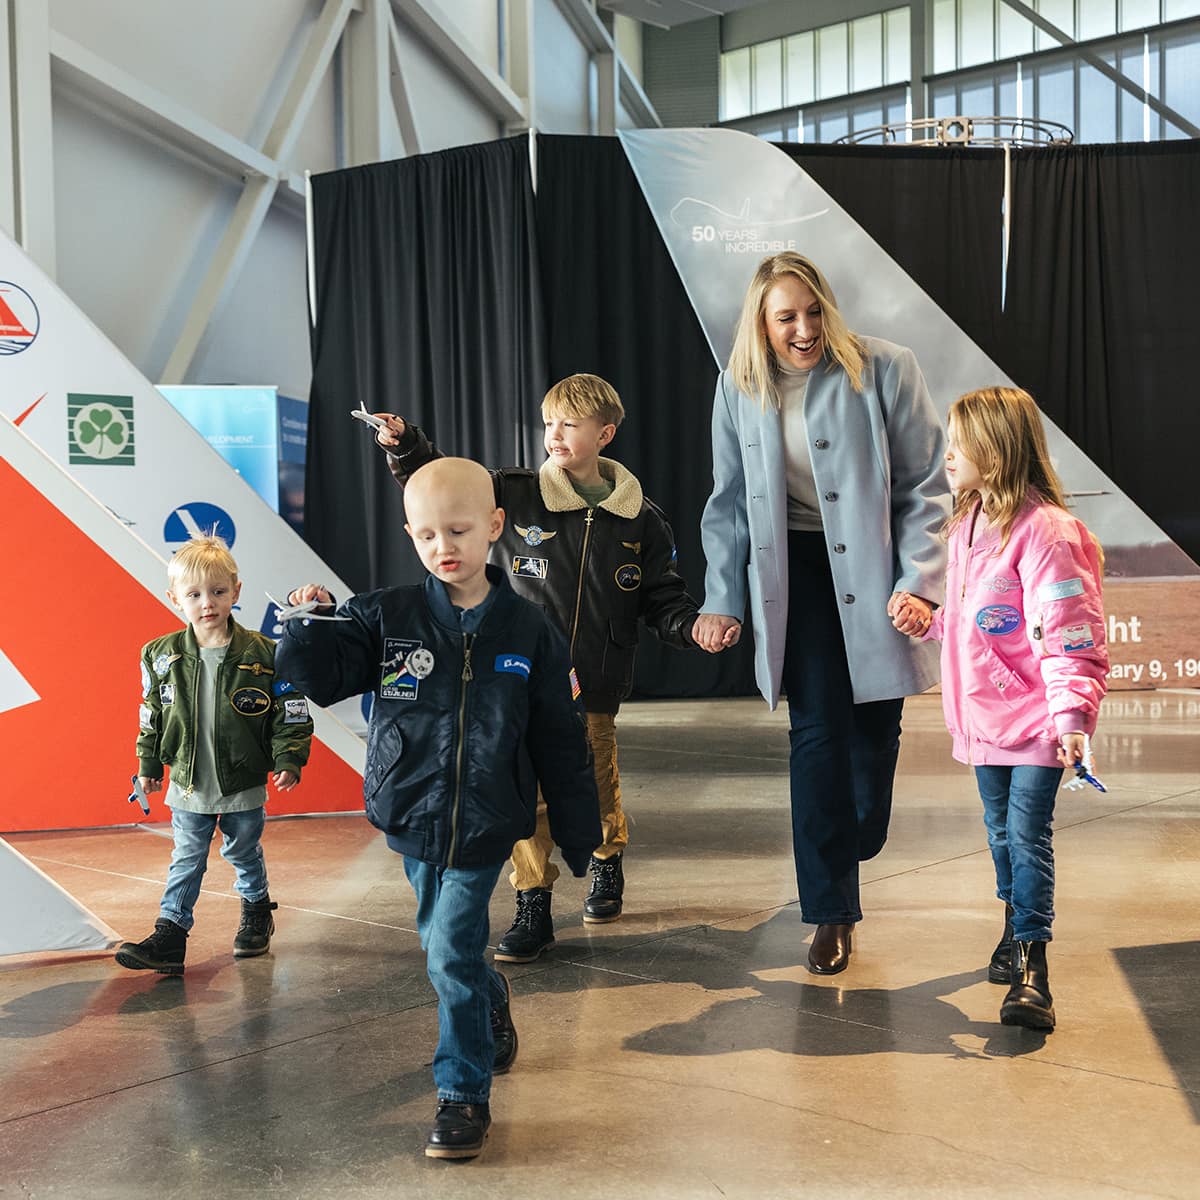 Blond woman and four blond children walking through a museum.